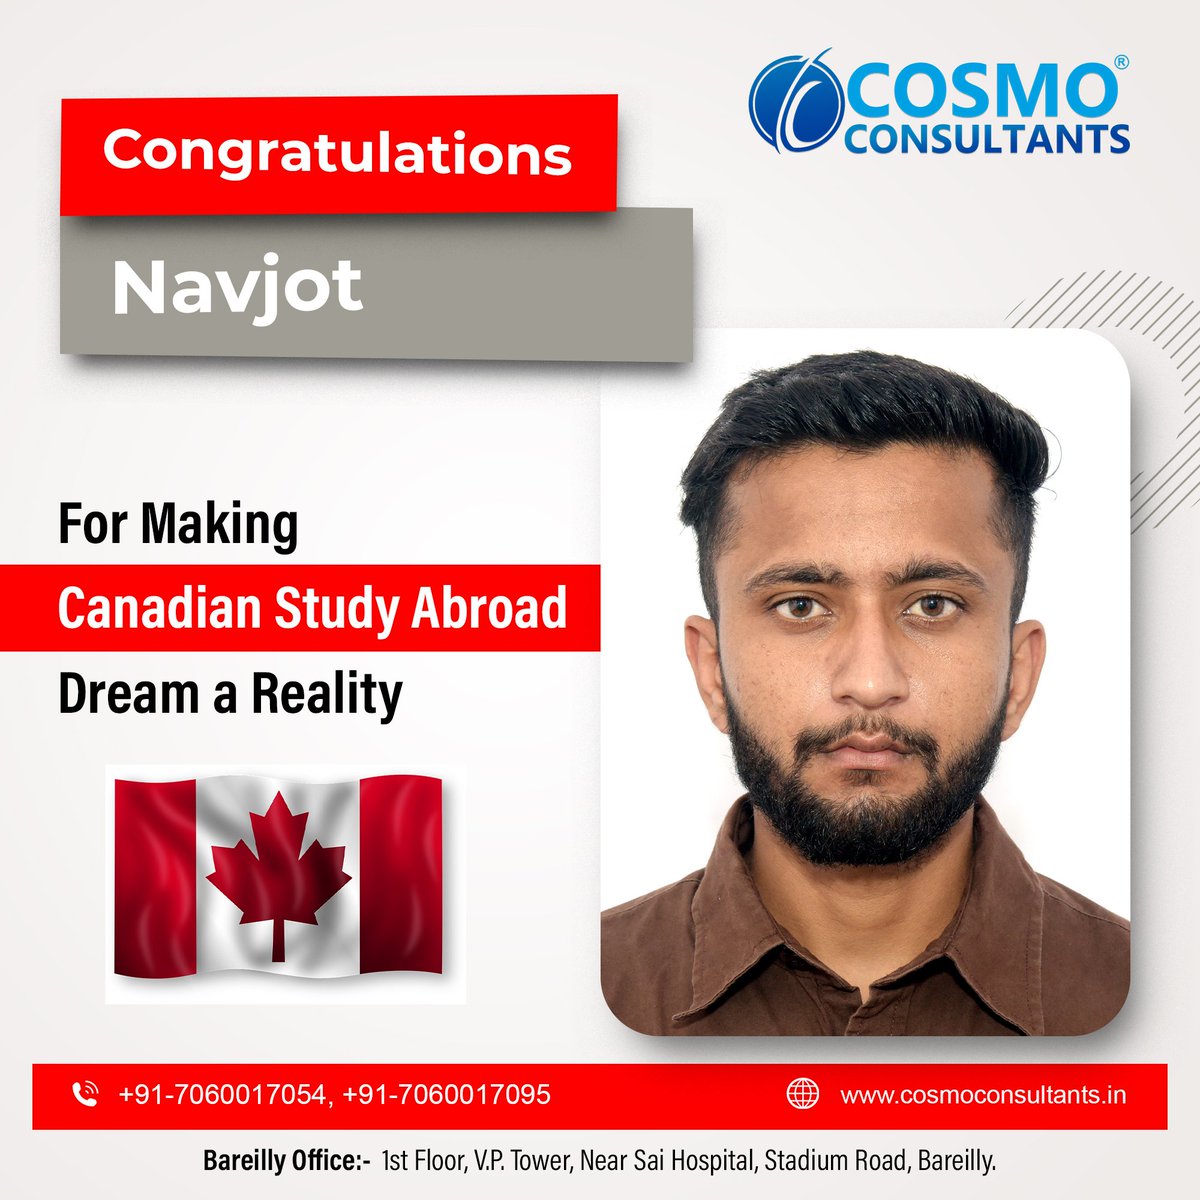 Congratulations 𝐌𝐫. 𝐍𝐚𝐯𝐣𝐨𝐭 for your study journey in Canada. Cosmo Consultants wishes you a very bright and successful career ahead.
For more information reach us: +91-7060017054, +91-7060017095.

#CosmoConsultants #Canada #StudyInCanada #StudyAbroad #studentvisa